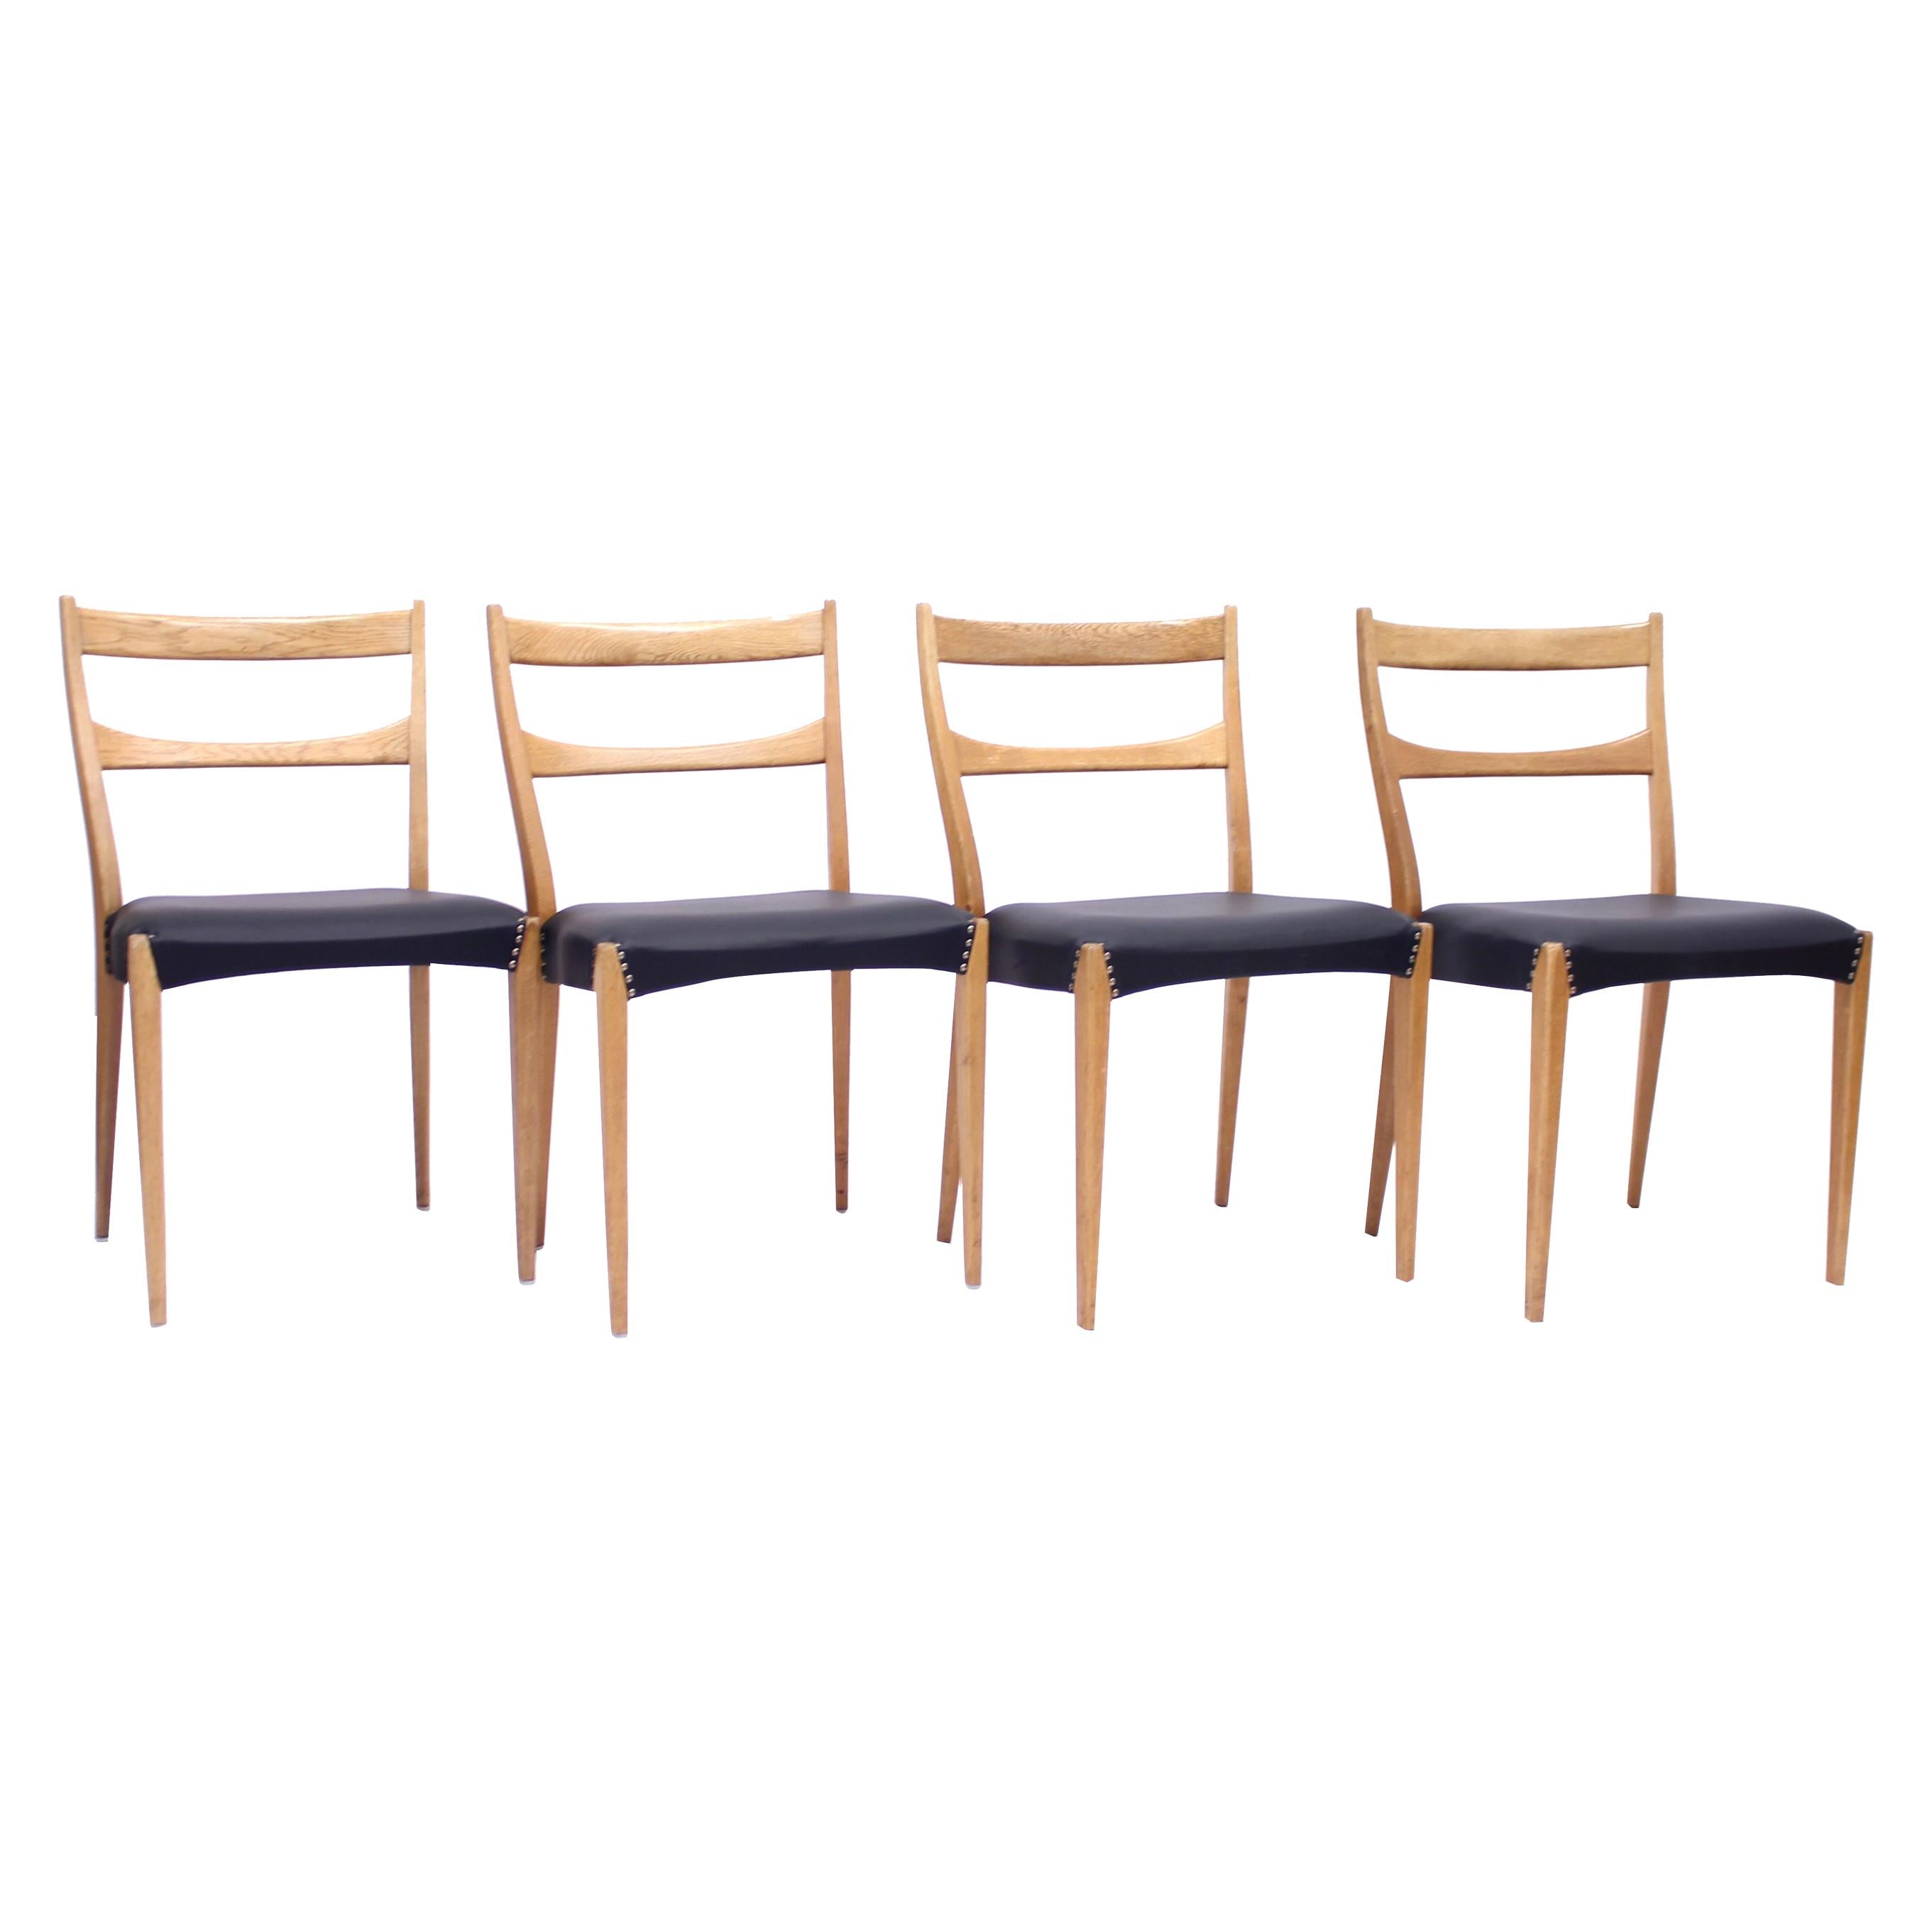 Scandinavian Oak Dining Chairs with Black Leather Seats, 1950s